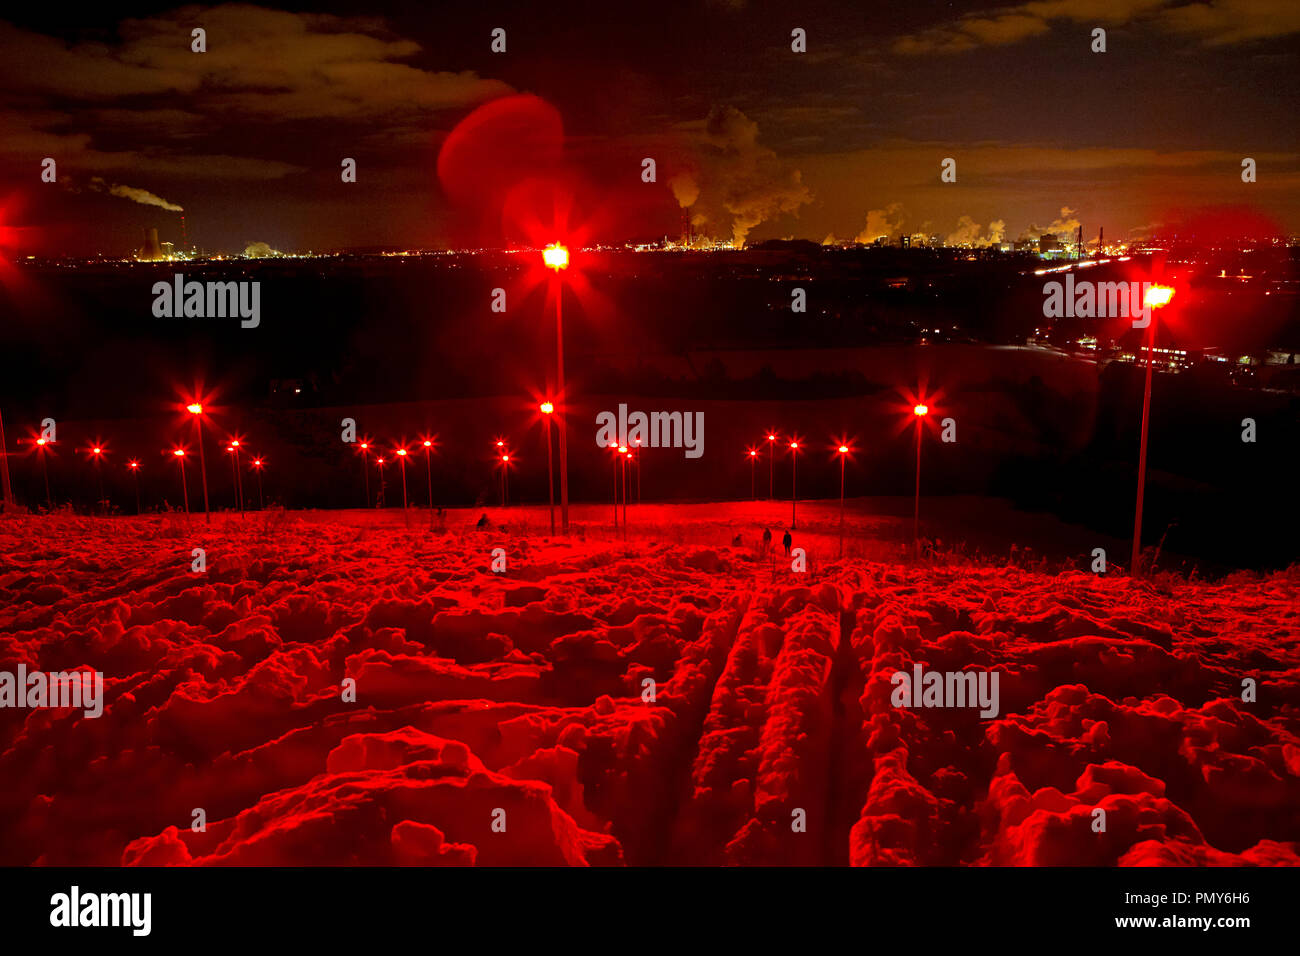 In September 2007, the oversized miner's lamp "Geleucht" was erected as a landmark by the art professor Otto Piene on the Halde Rheinpreußen in Moers. The snow-covered slope of the heap is shrouded in red light by numerous headlamps. Stock Photo